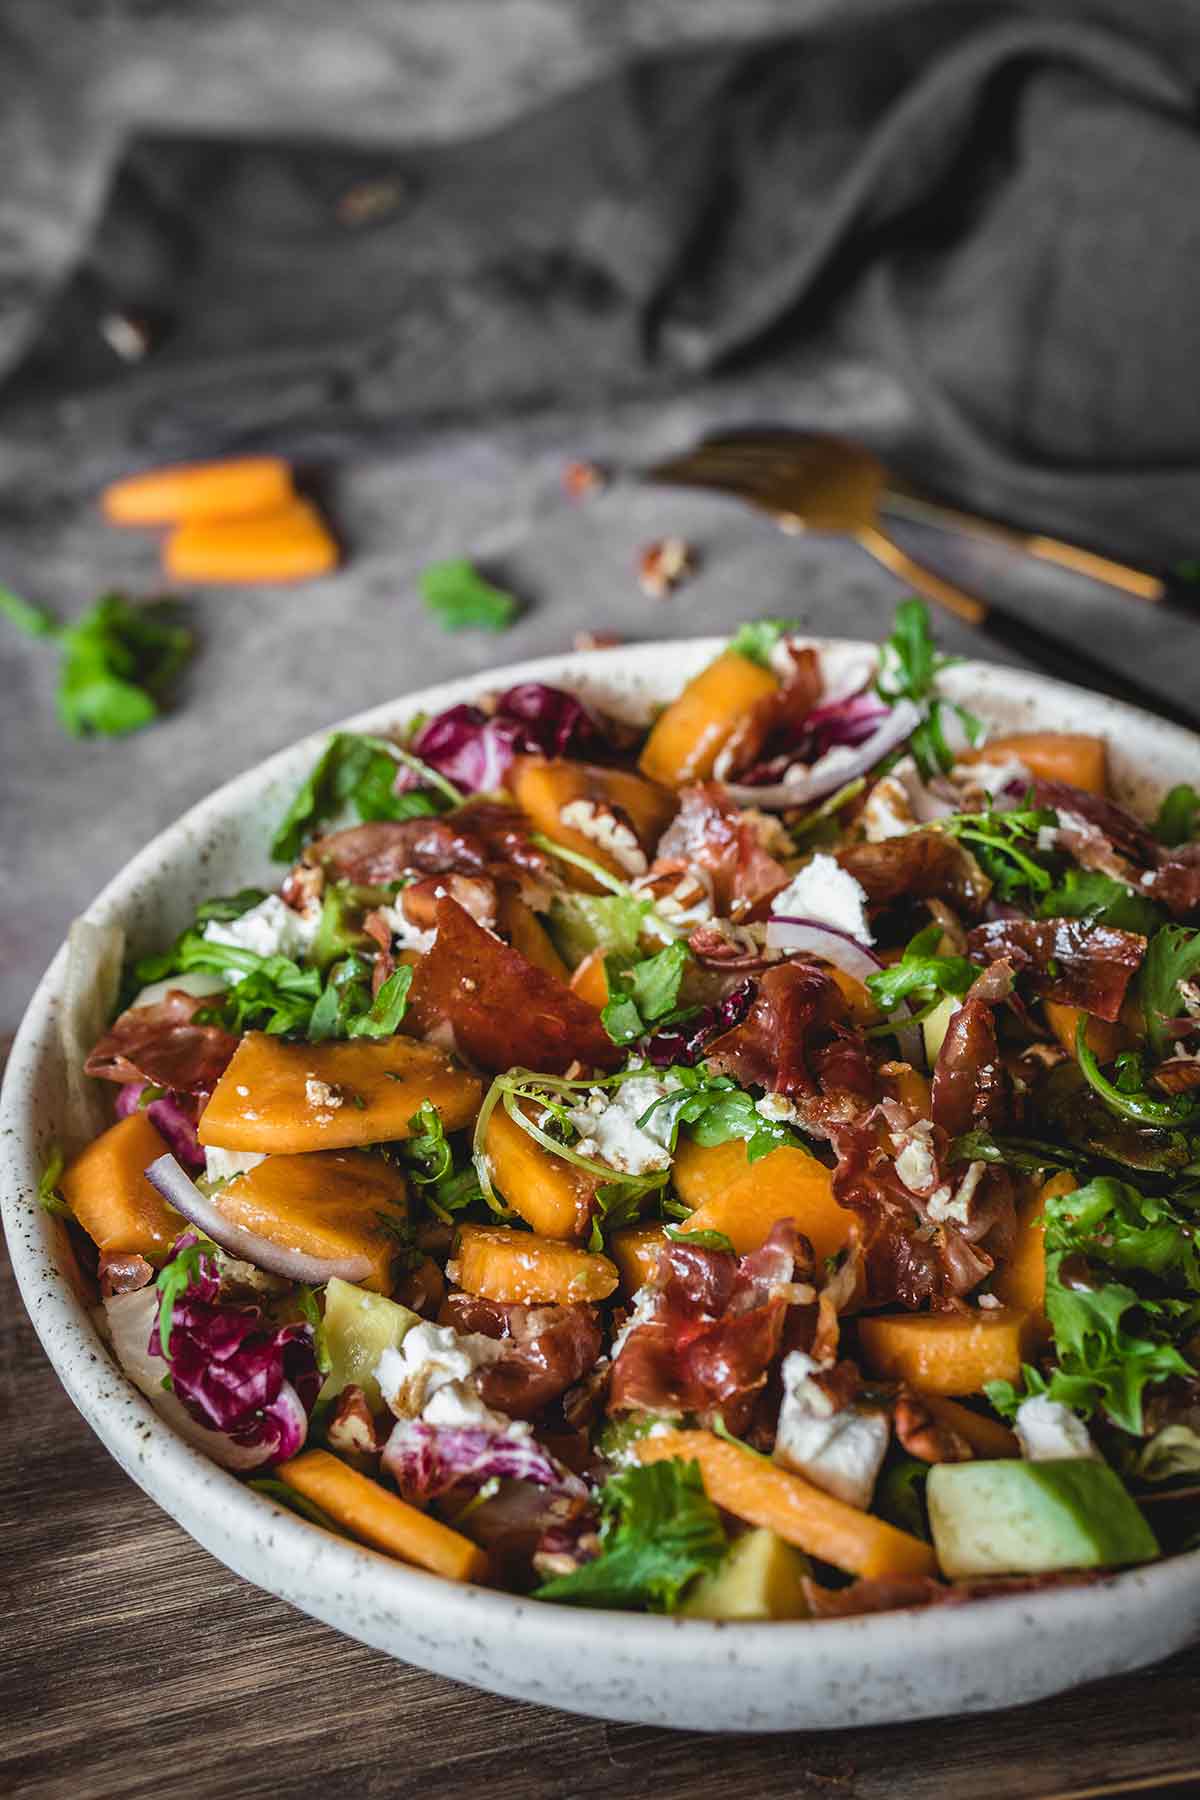 Cantaloupe salad with prosciutto in a bowl